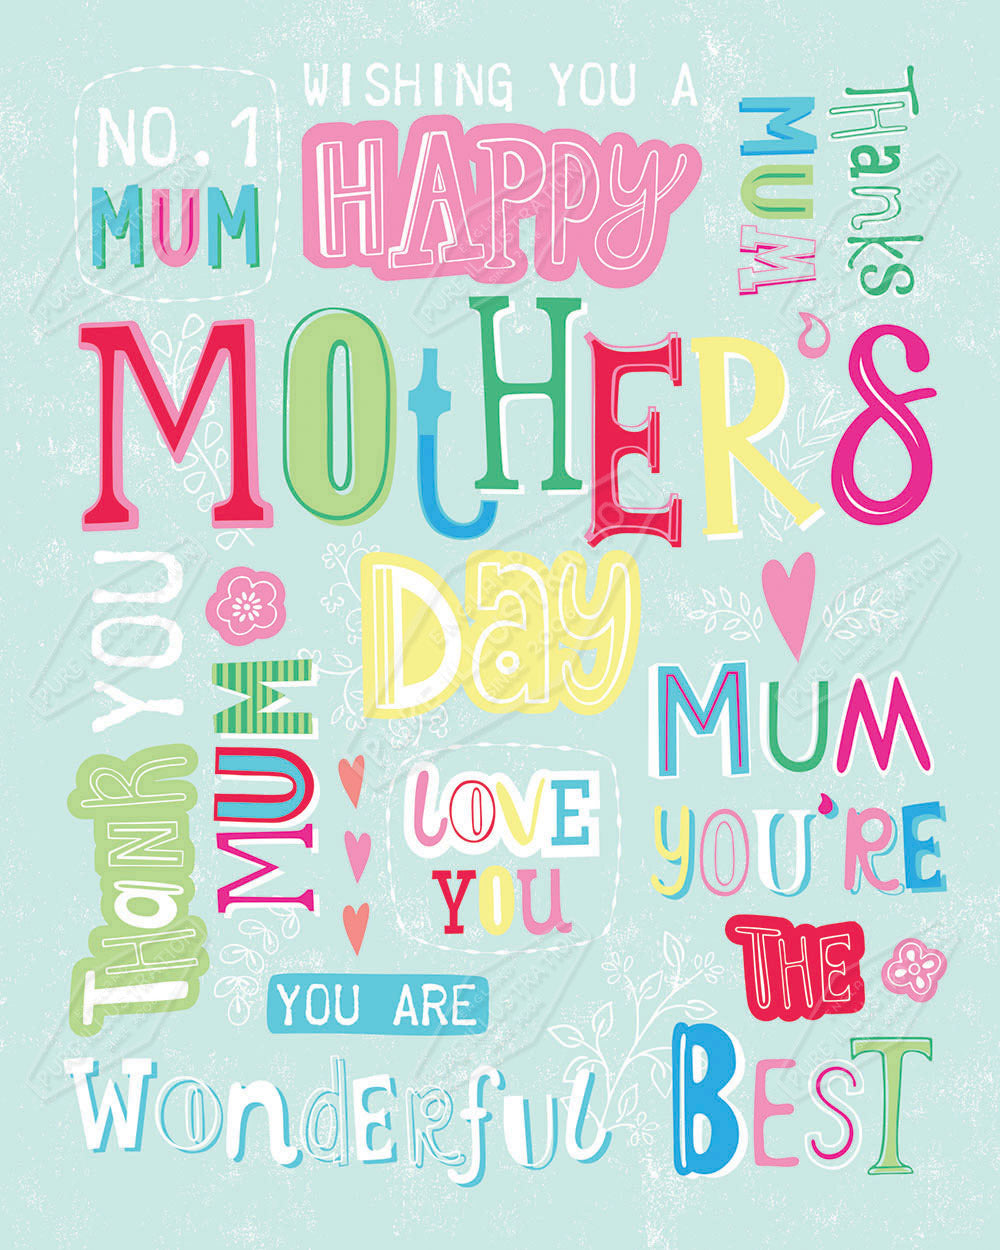 Mother's Day Text Pattern Design by Gill Eggleston for Pure Art Licensing Agency & Surface Design Studio